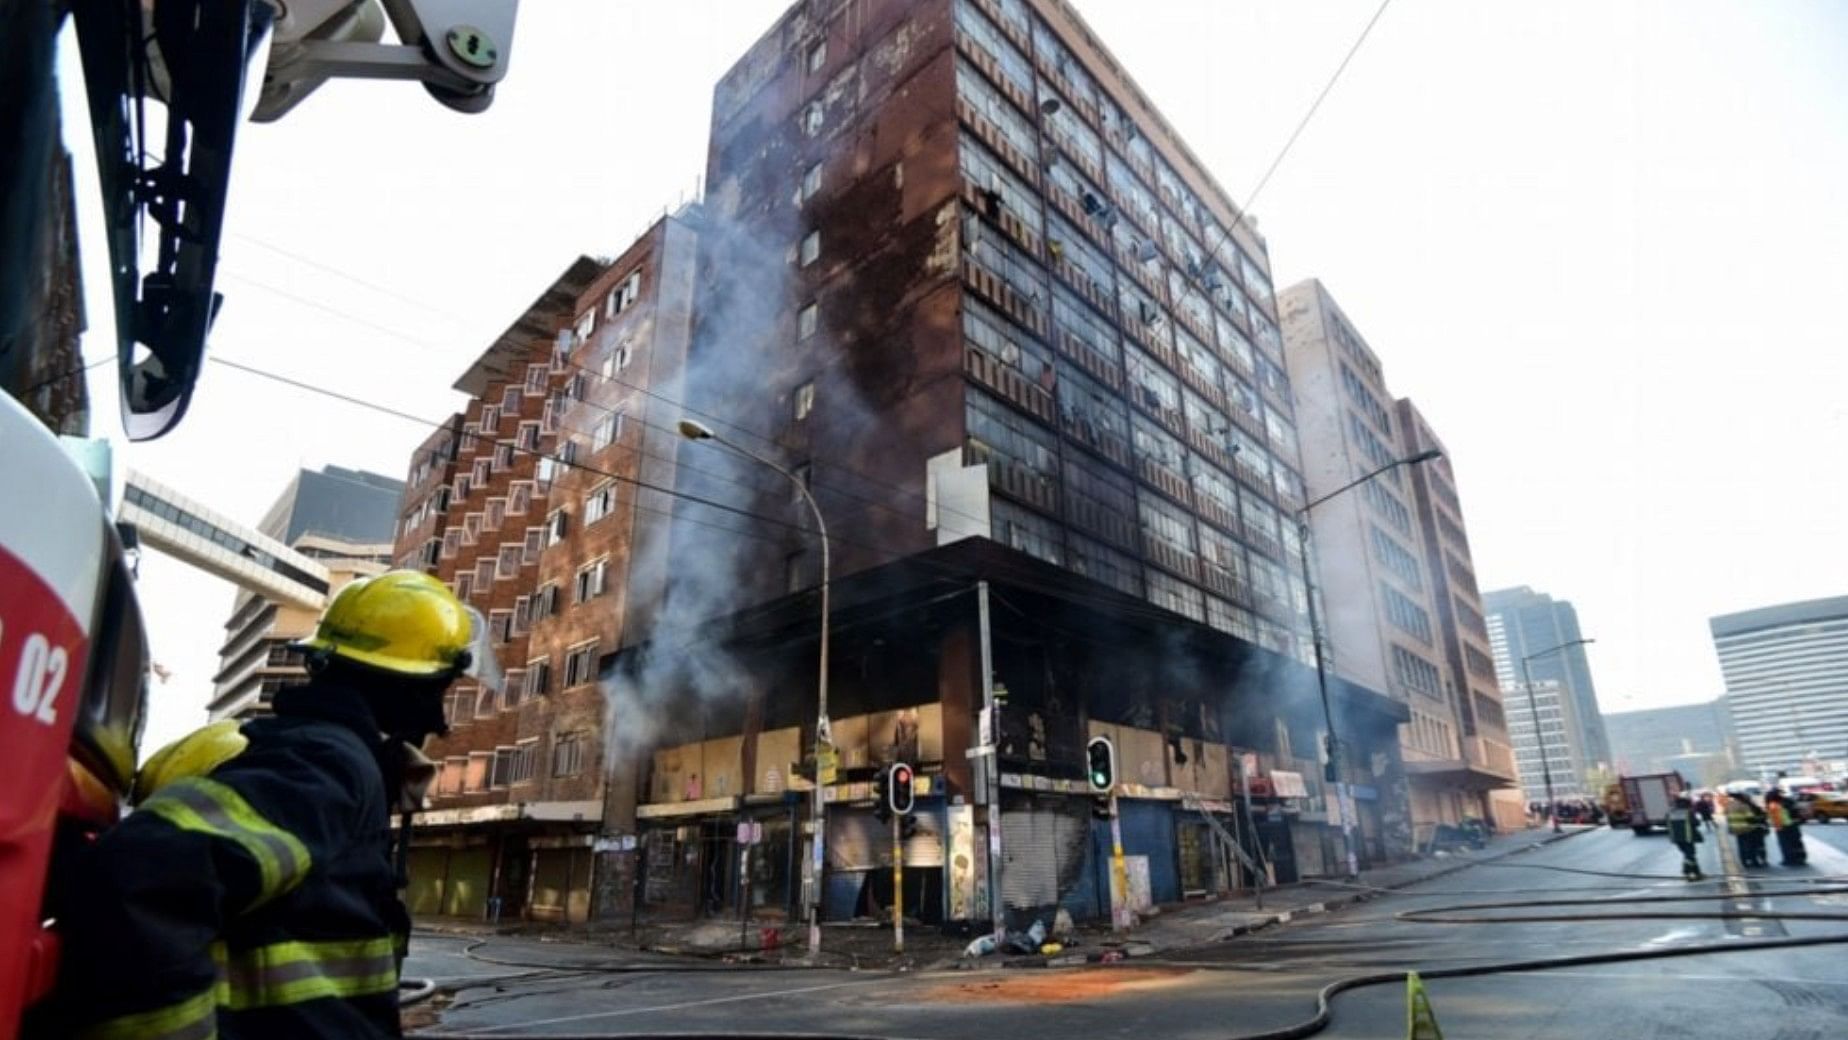 <div class="paragraphs"><p>Fire engulfs a residential building in the central business district of&nbsp;<a href="https://www.thequint.com/voices/blogs/54-yrs-after-the-rivonia-trial-nelson-mandelas-legacy-lives-on">Johannesburg</a>, South Africa claiming the lives of at least 63 on Thursday, 31&nbsp;August.&nbsp;</p></div>